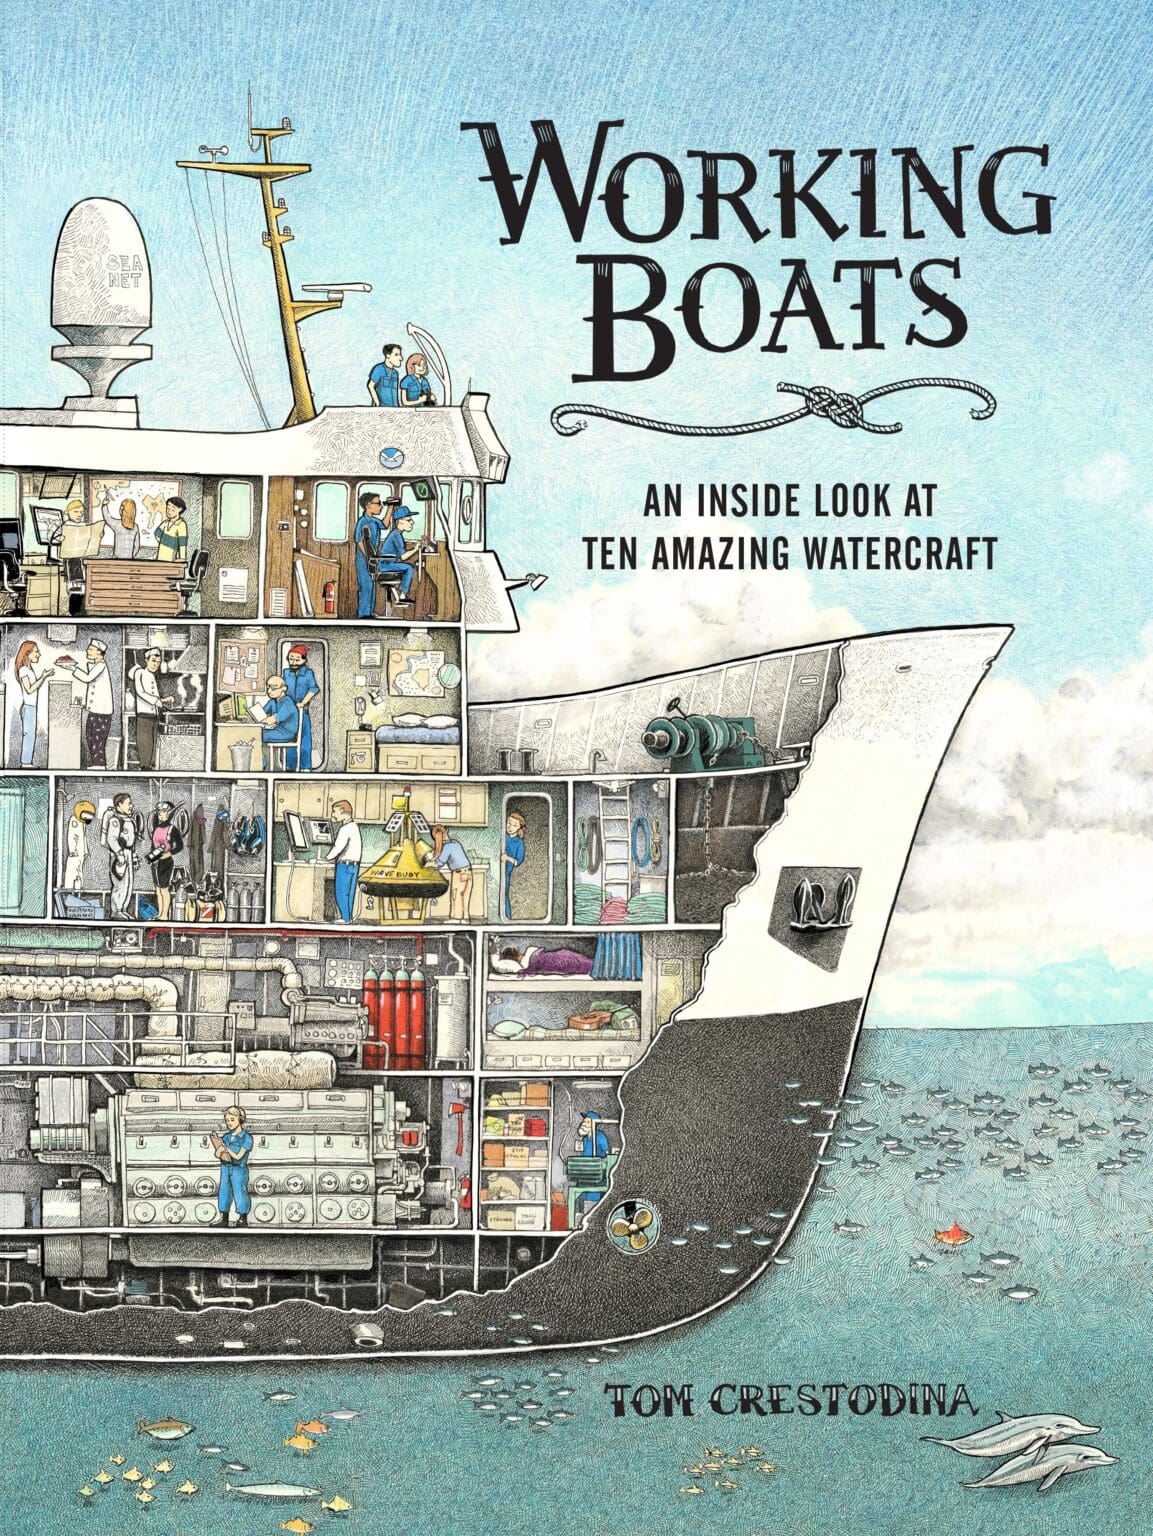 Bellingham-based fisherman and artist Tom Crestodina's “Working Boats: An Inside Look at Ten Amazing Watercraft” book cover shows the inside of a ship.